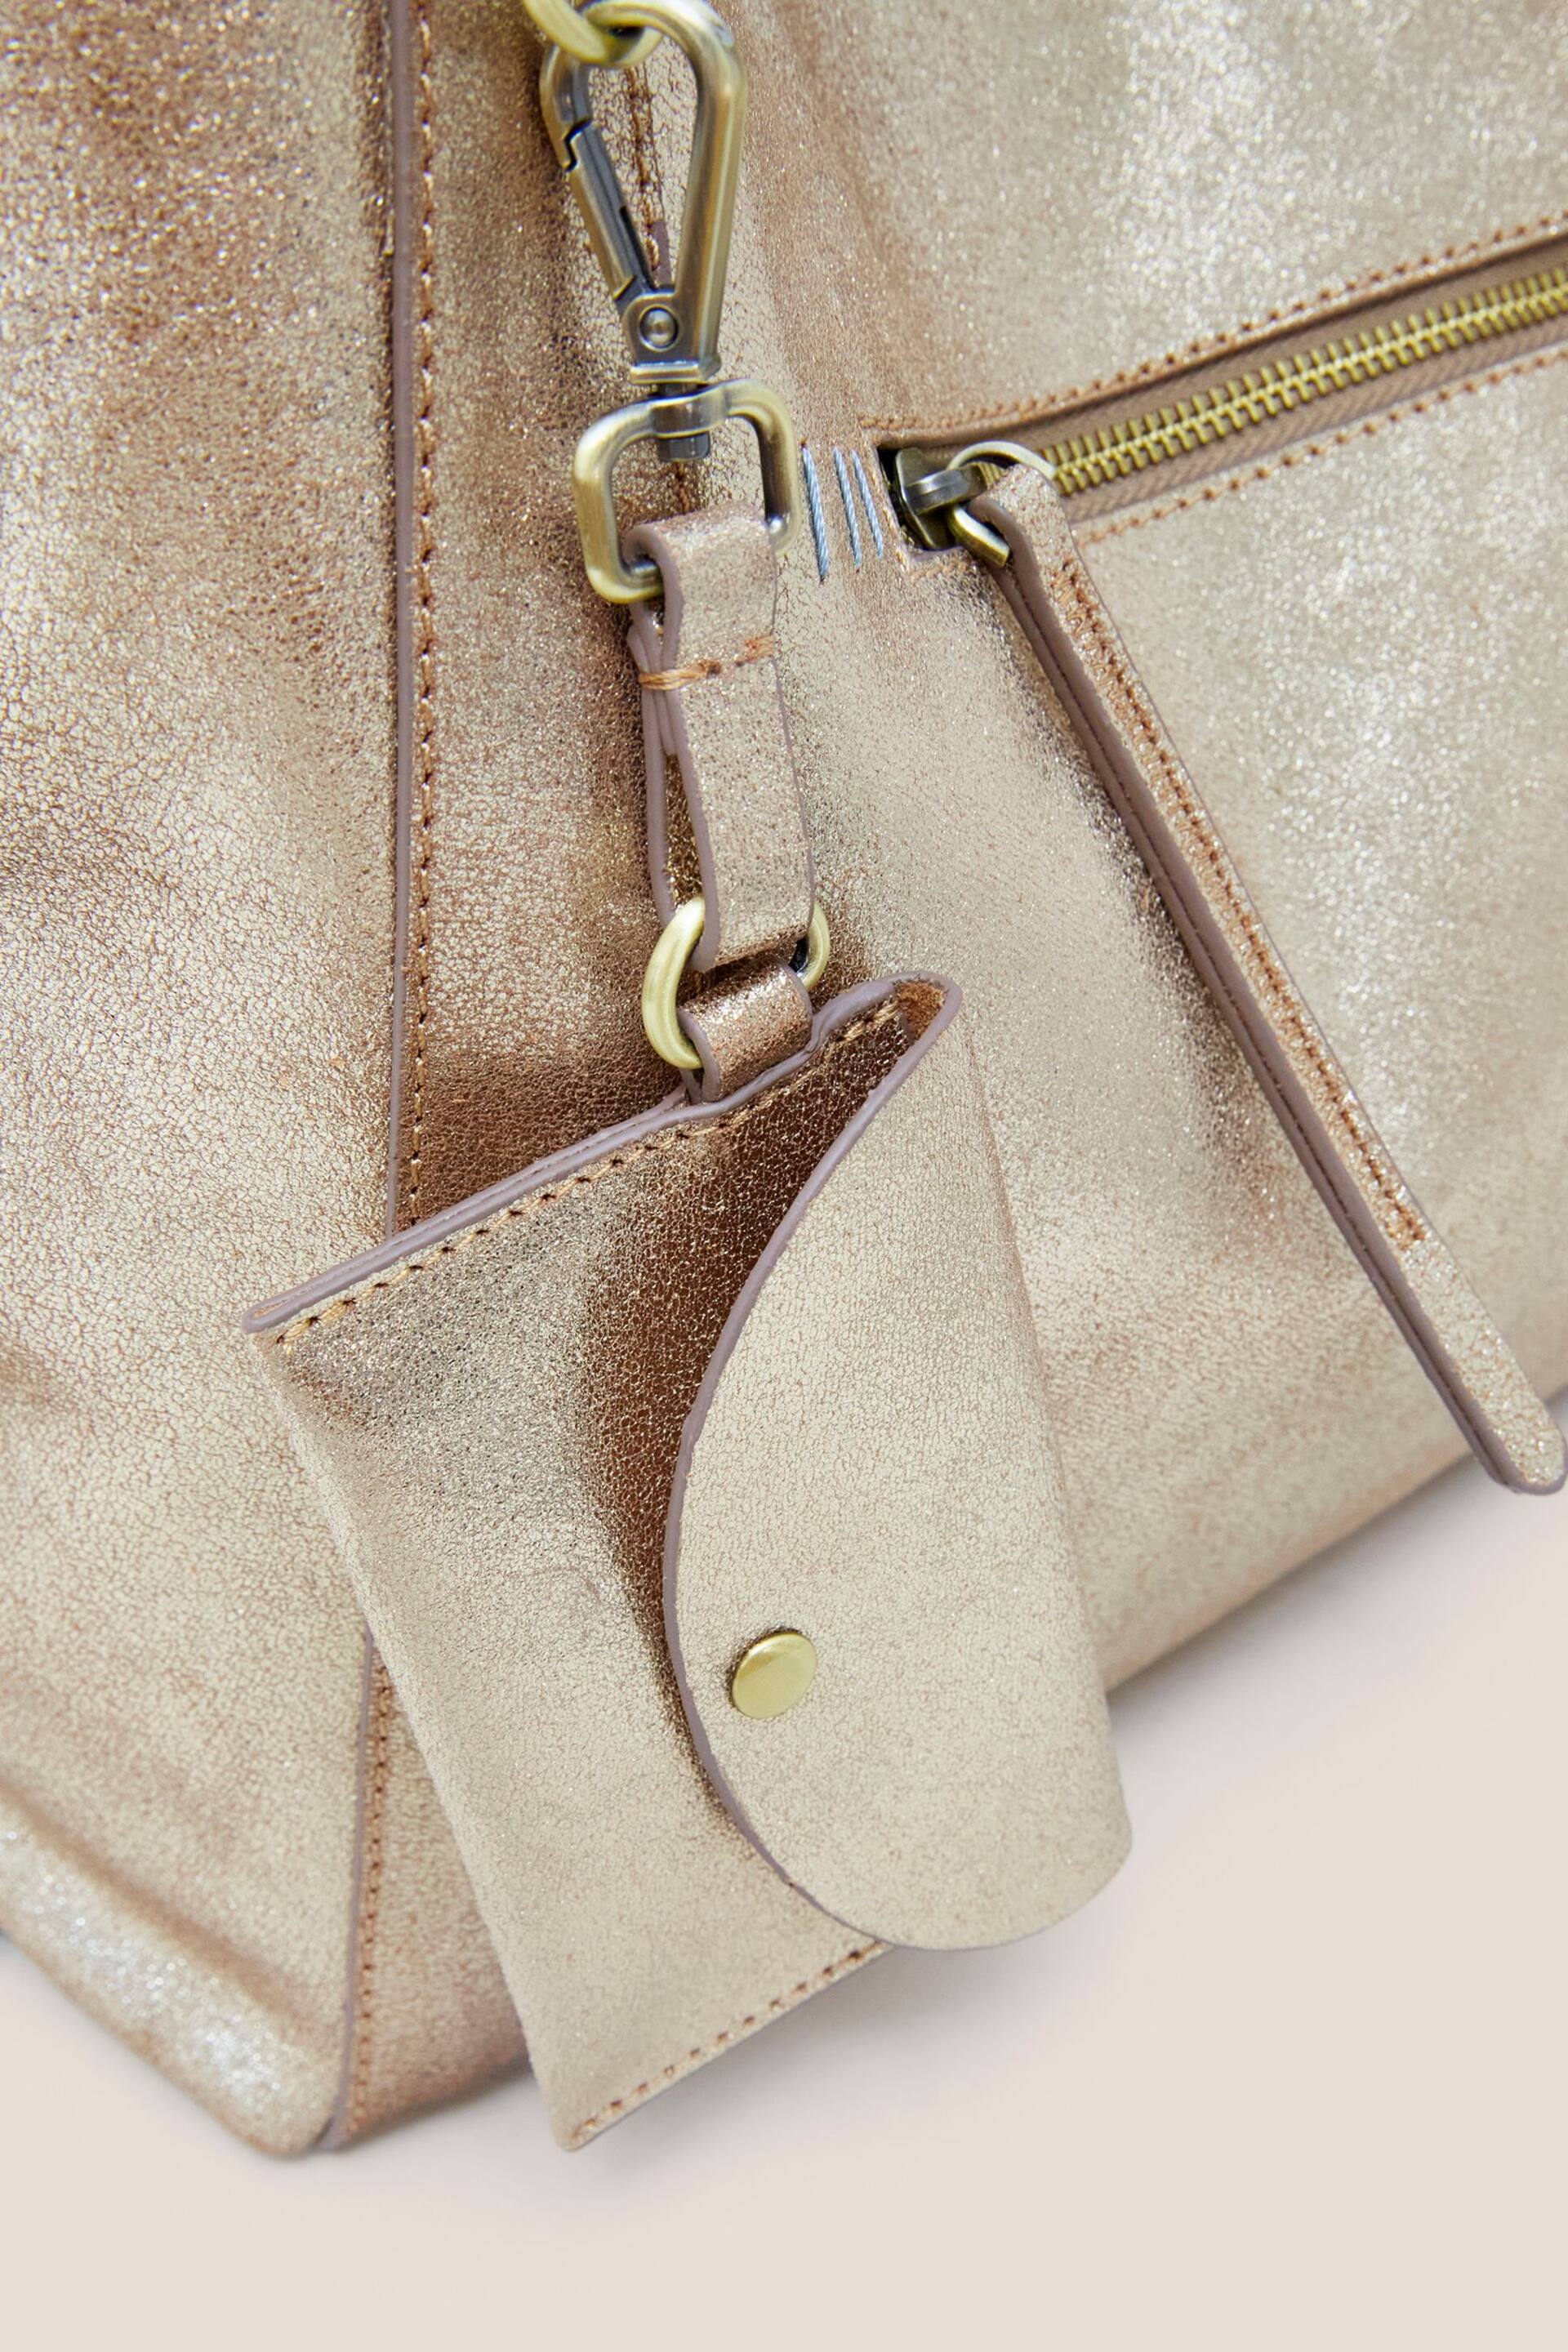 White Stuff Gold Hannah Leather Bag - Image 4 of 4